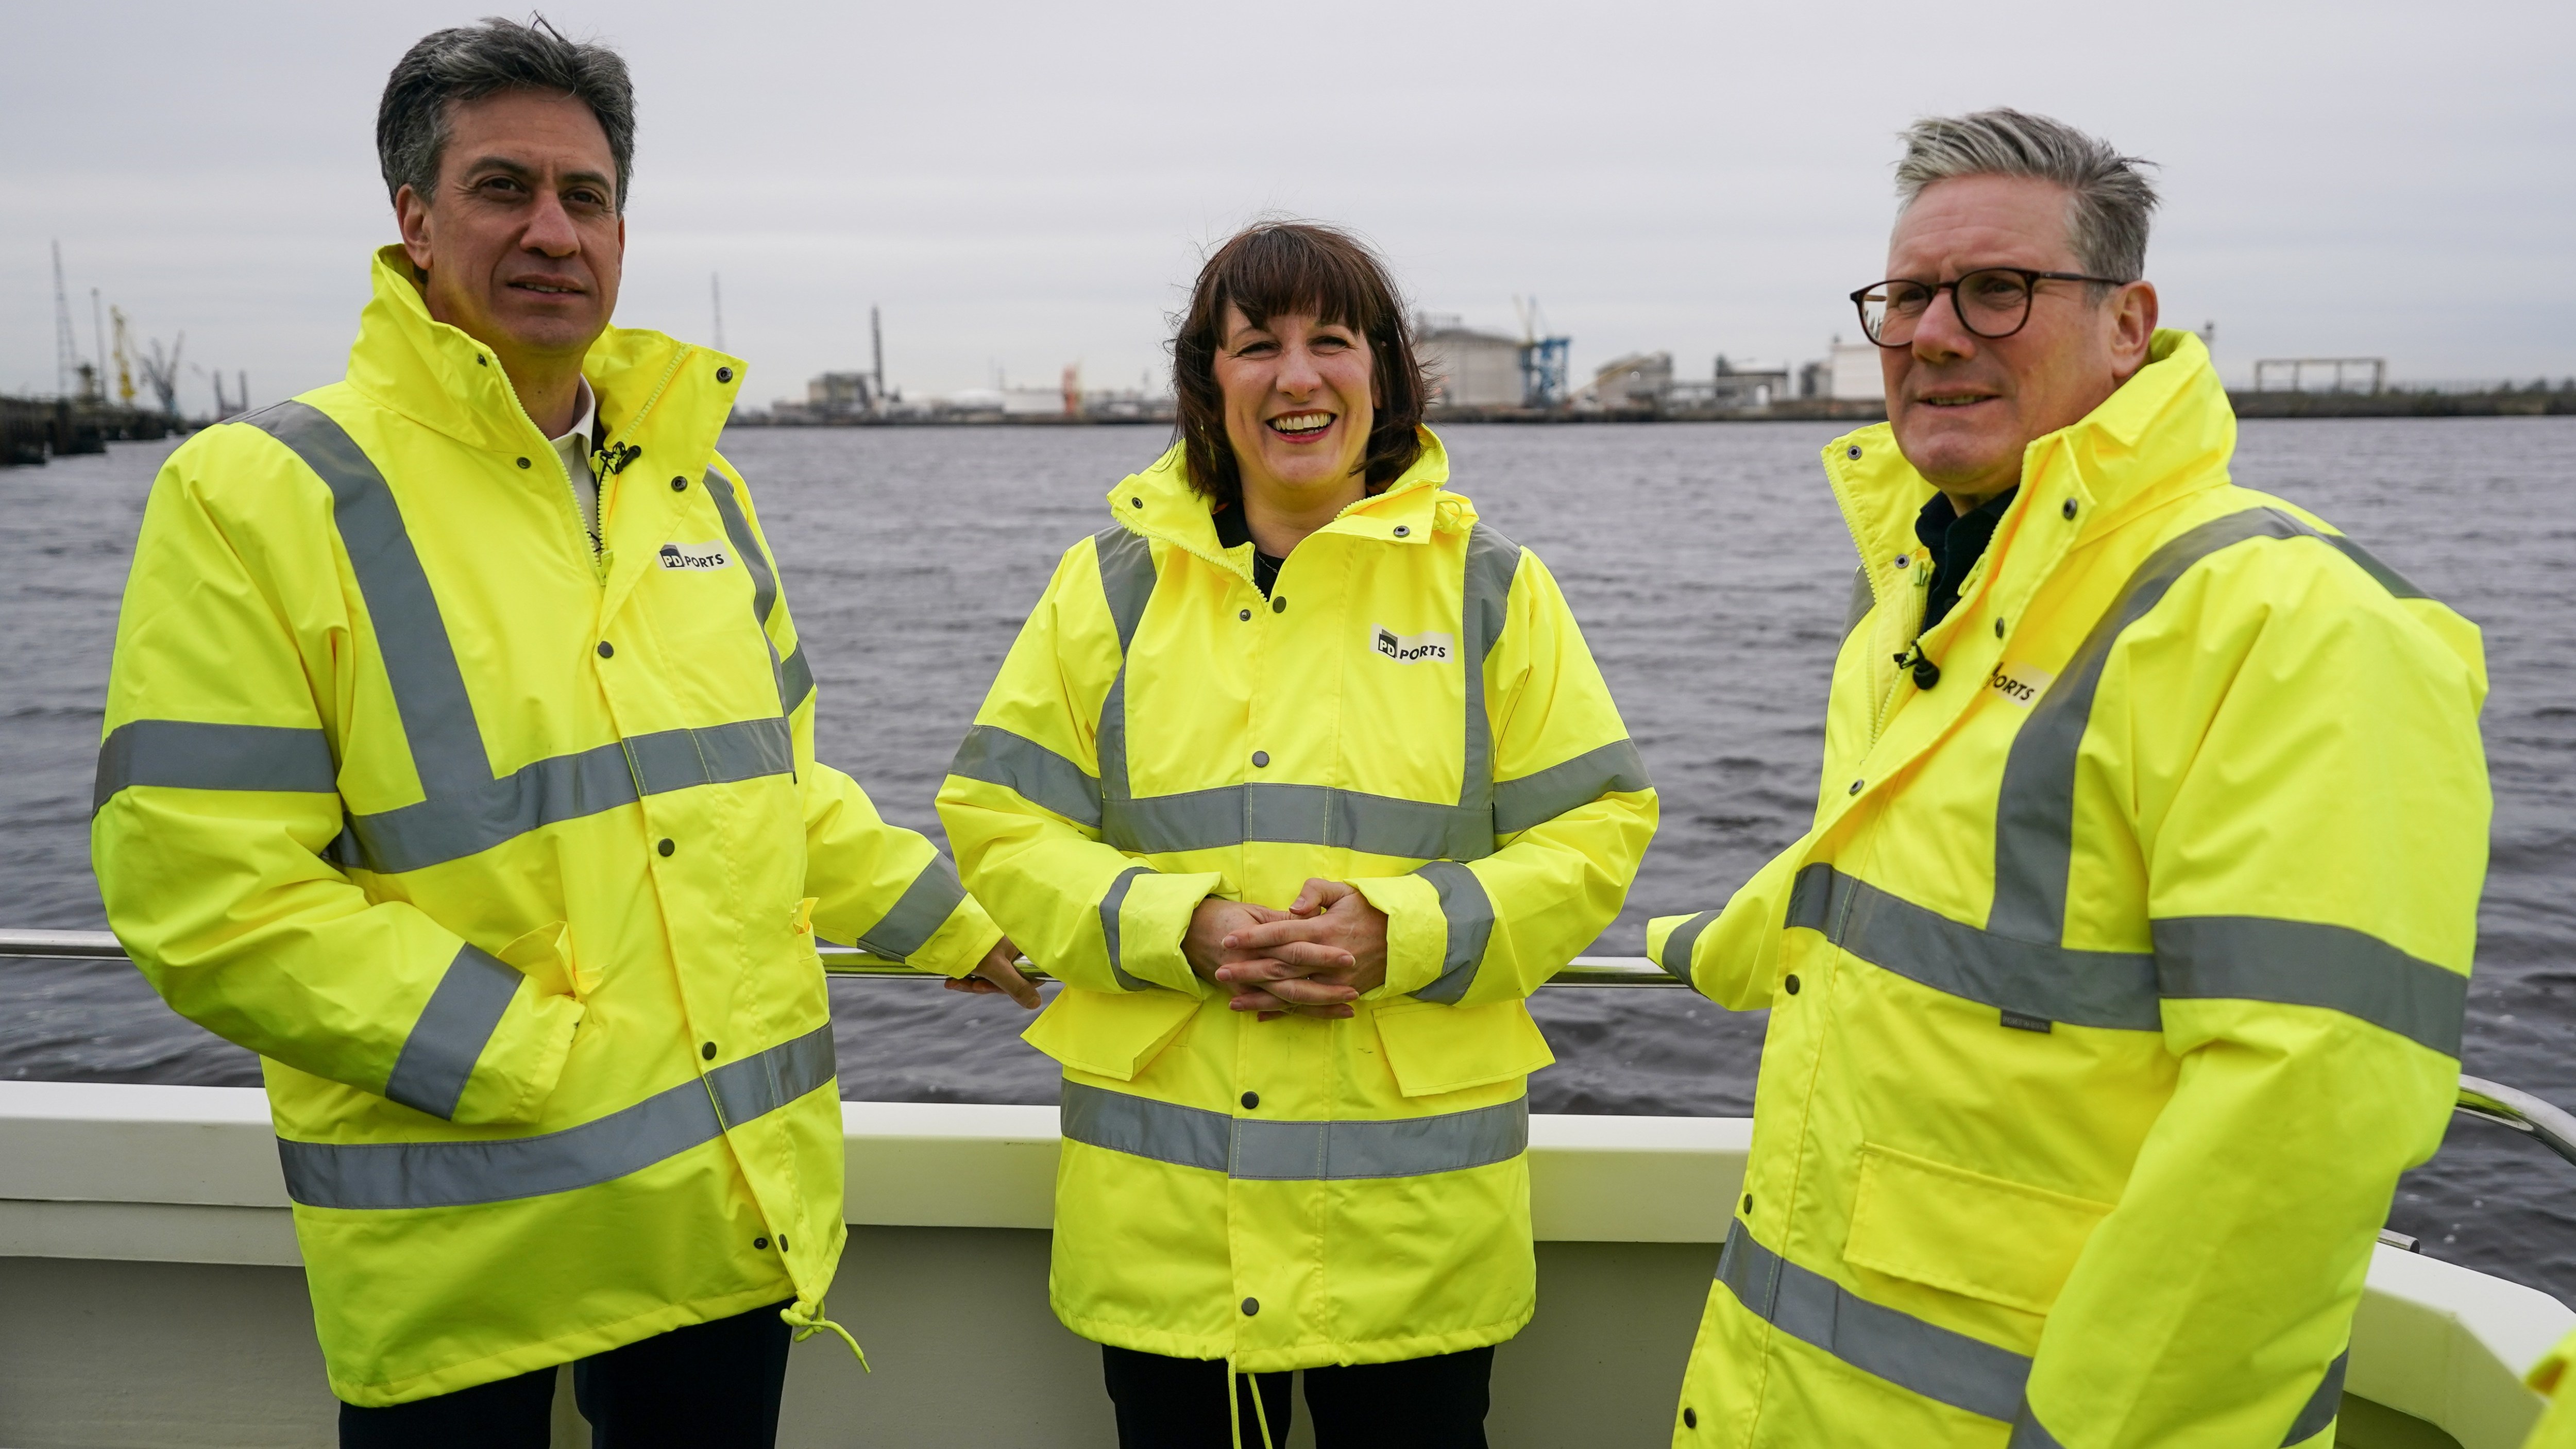 Ed Miliband, the shadow climate change secretary, Rachel Reeves, the shadow chancellor, and Sir Keir Starmer, the Labour leader, were in Teesside to promote the party’s plan to create green jobs last month